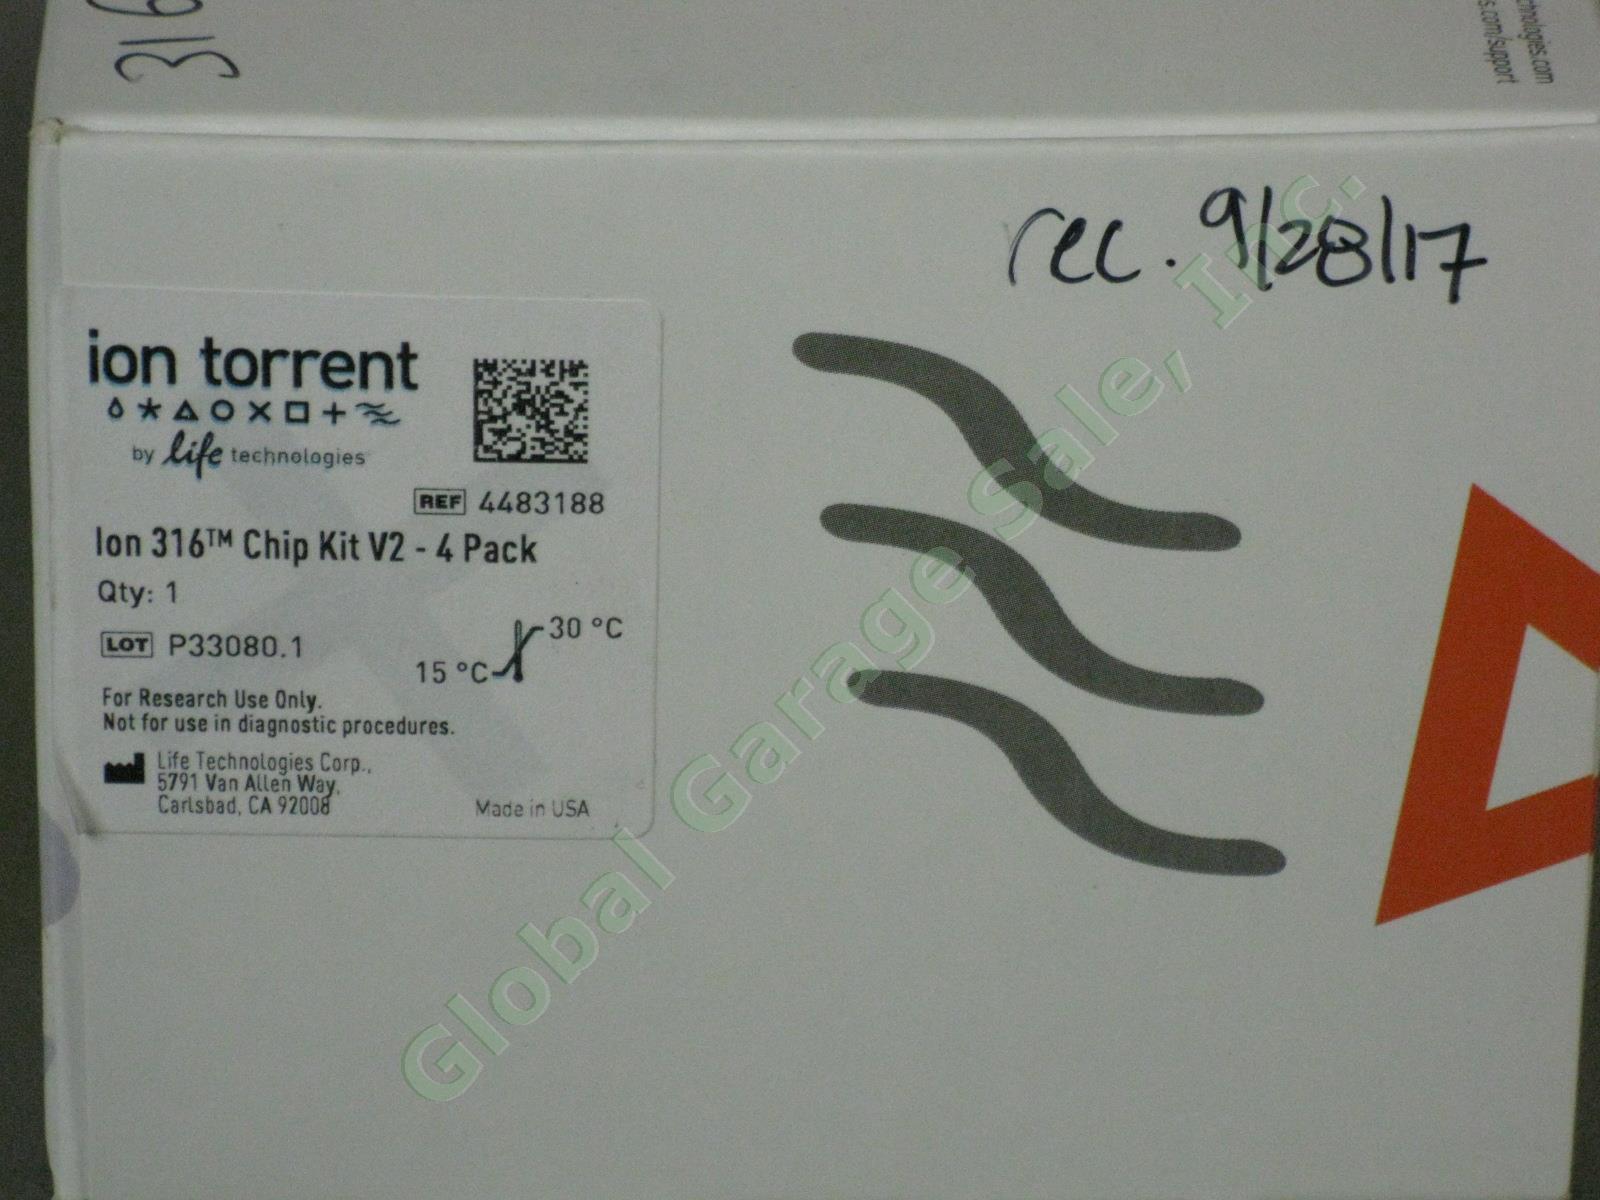 NEW! Sealed Life Technologies Ion Torrent Sequencing 316 Chip Kit V2 4-Pack 2